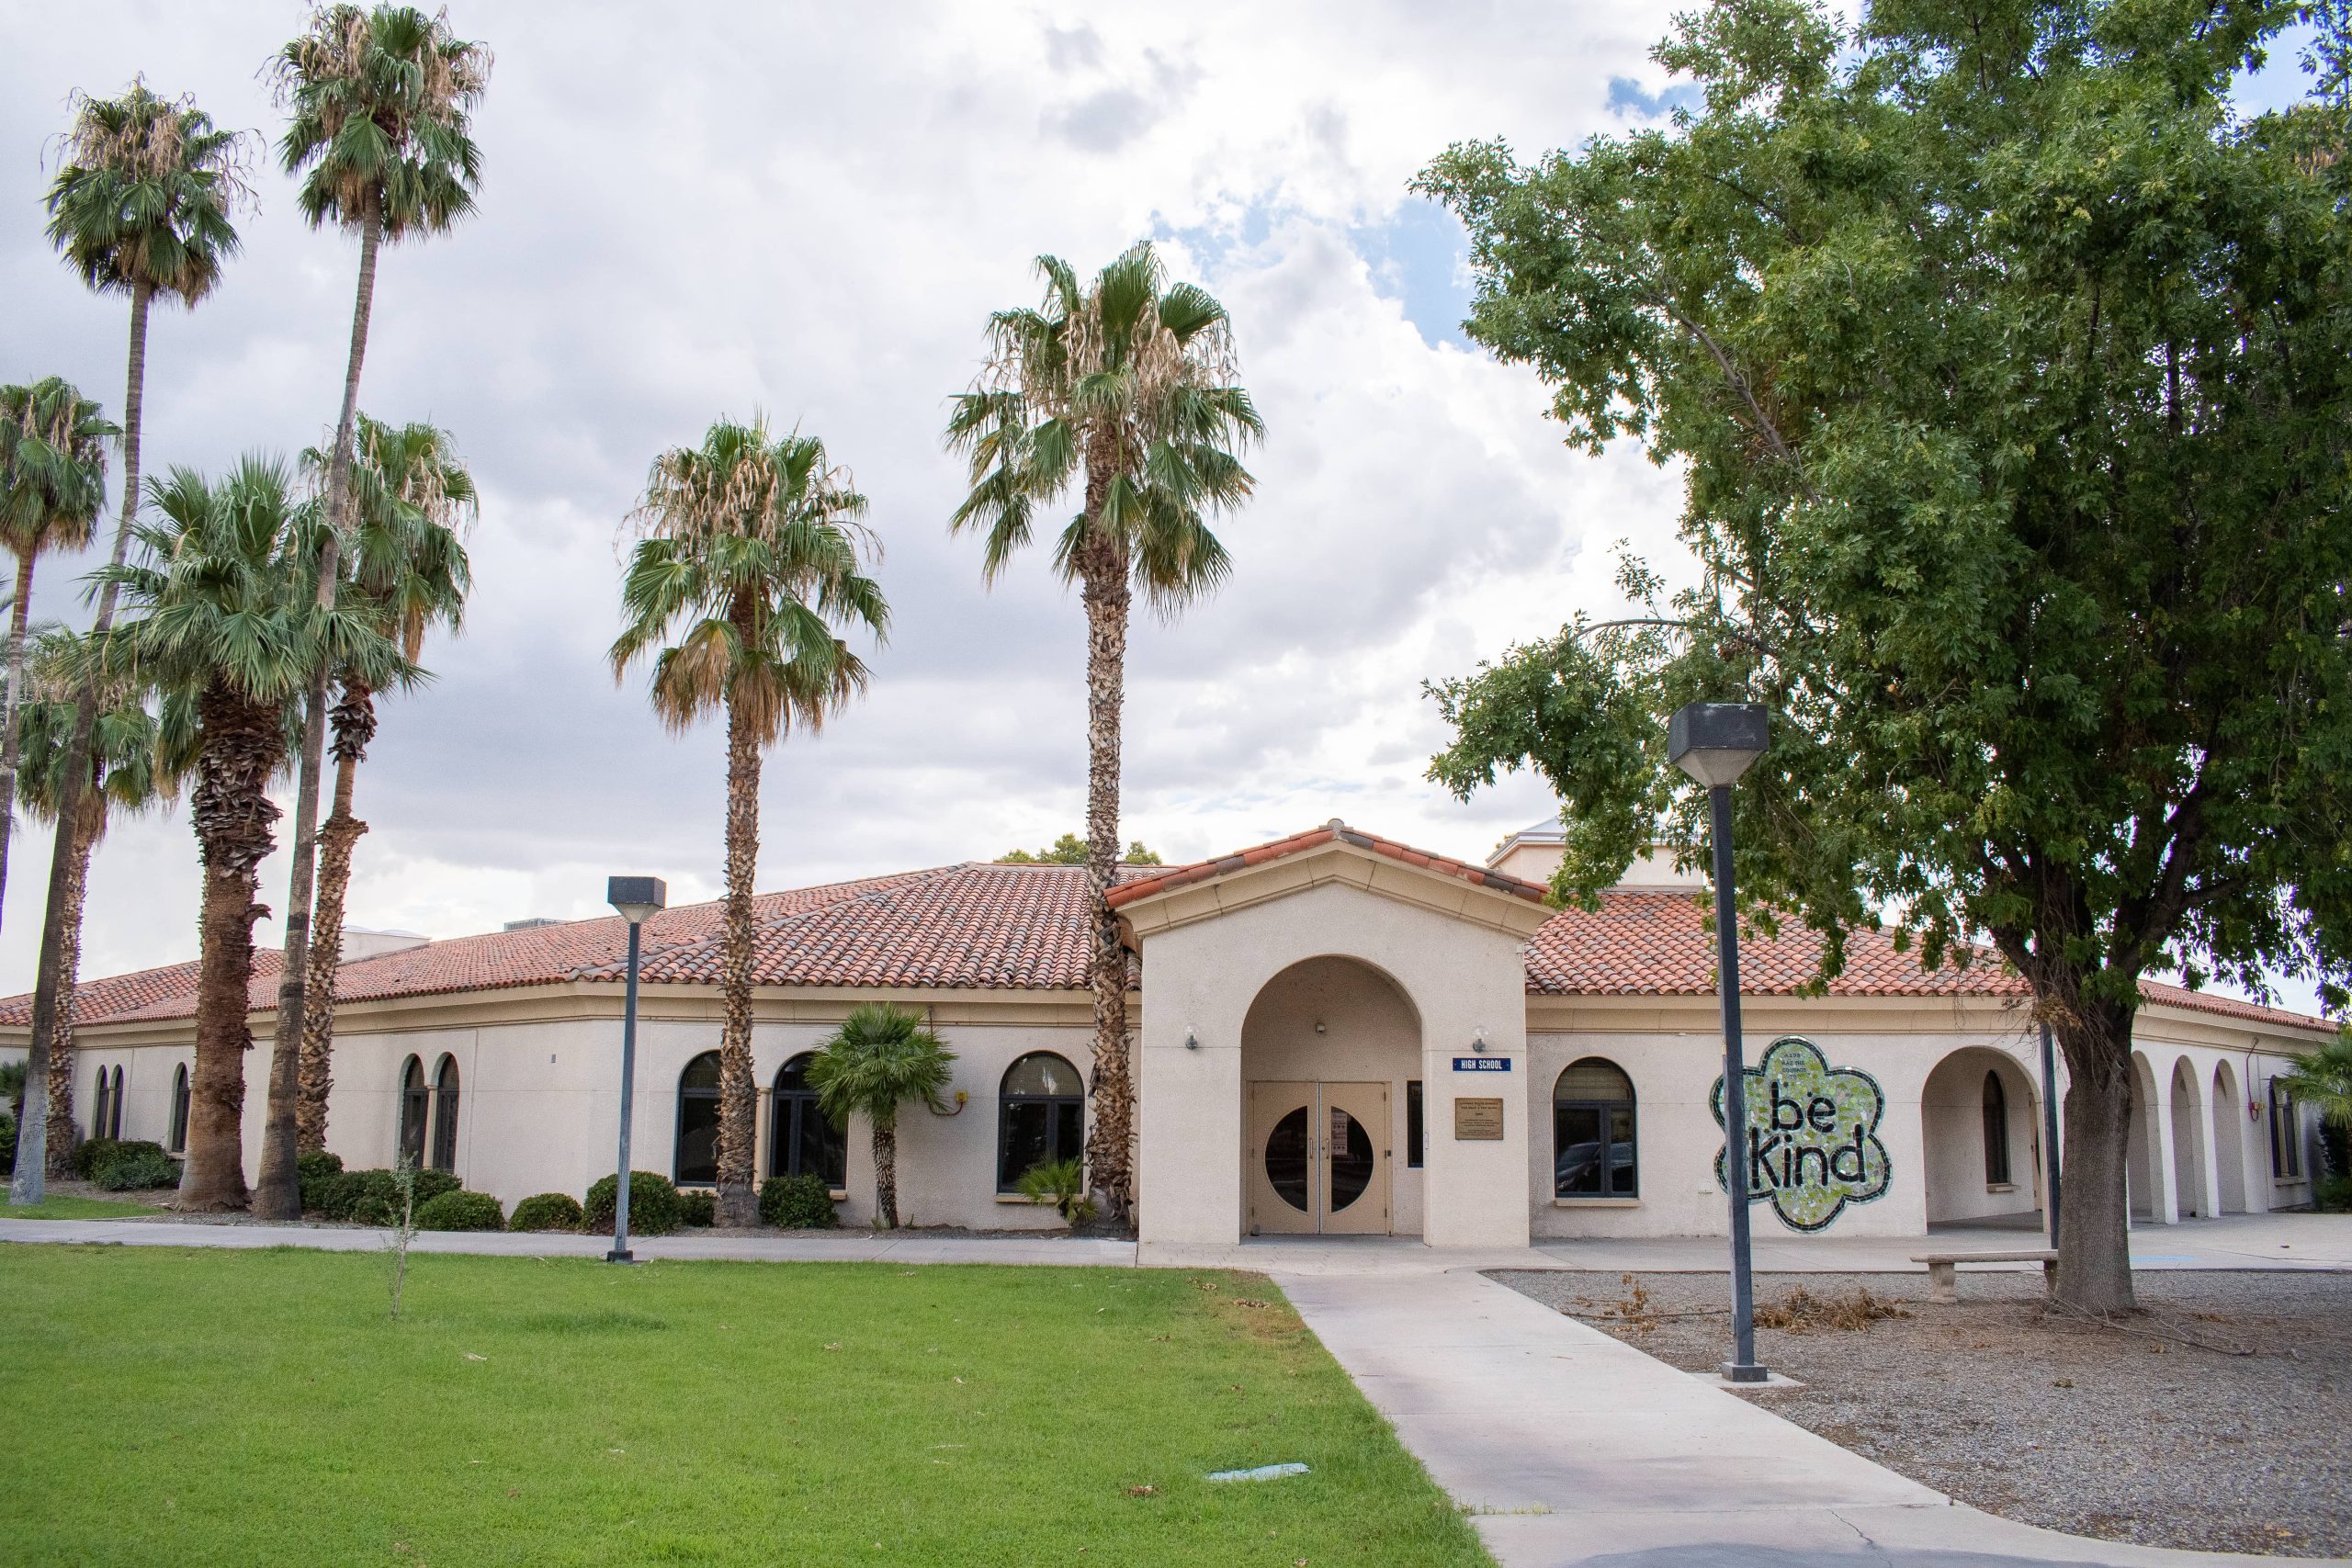 A panoramic photo of the high school building on ASDB campus. The building has beige, stucco walls, large, arched windows, a Spanish-tiled roof, and a tiled mural which reads, 'Be Kind'.